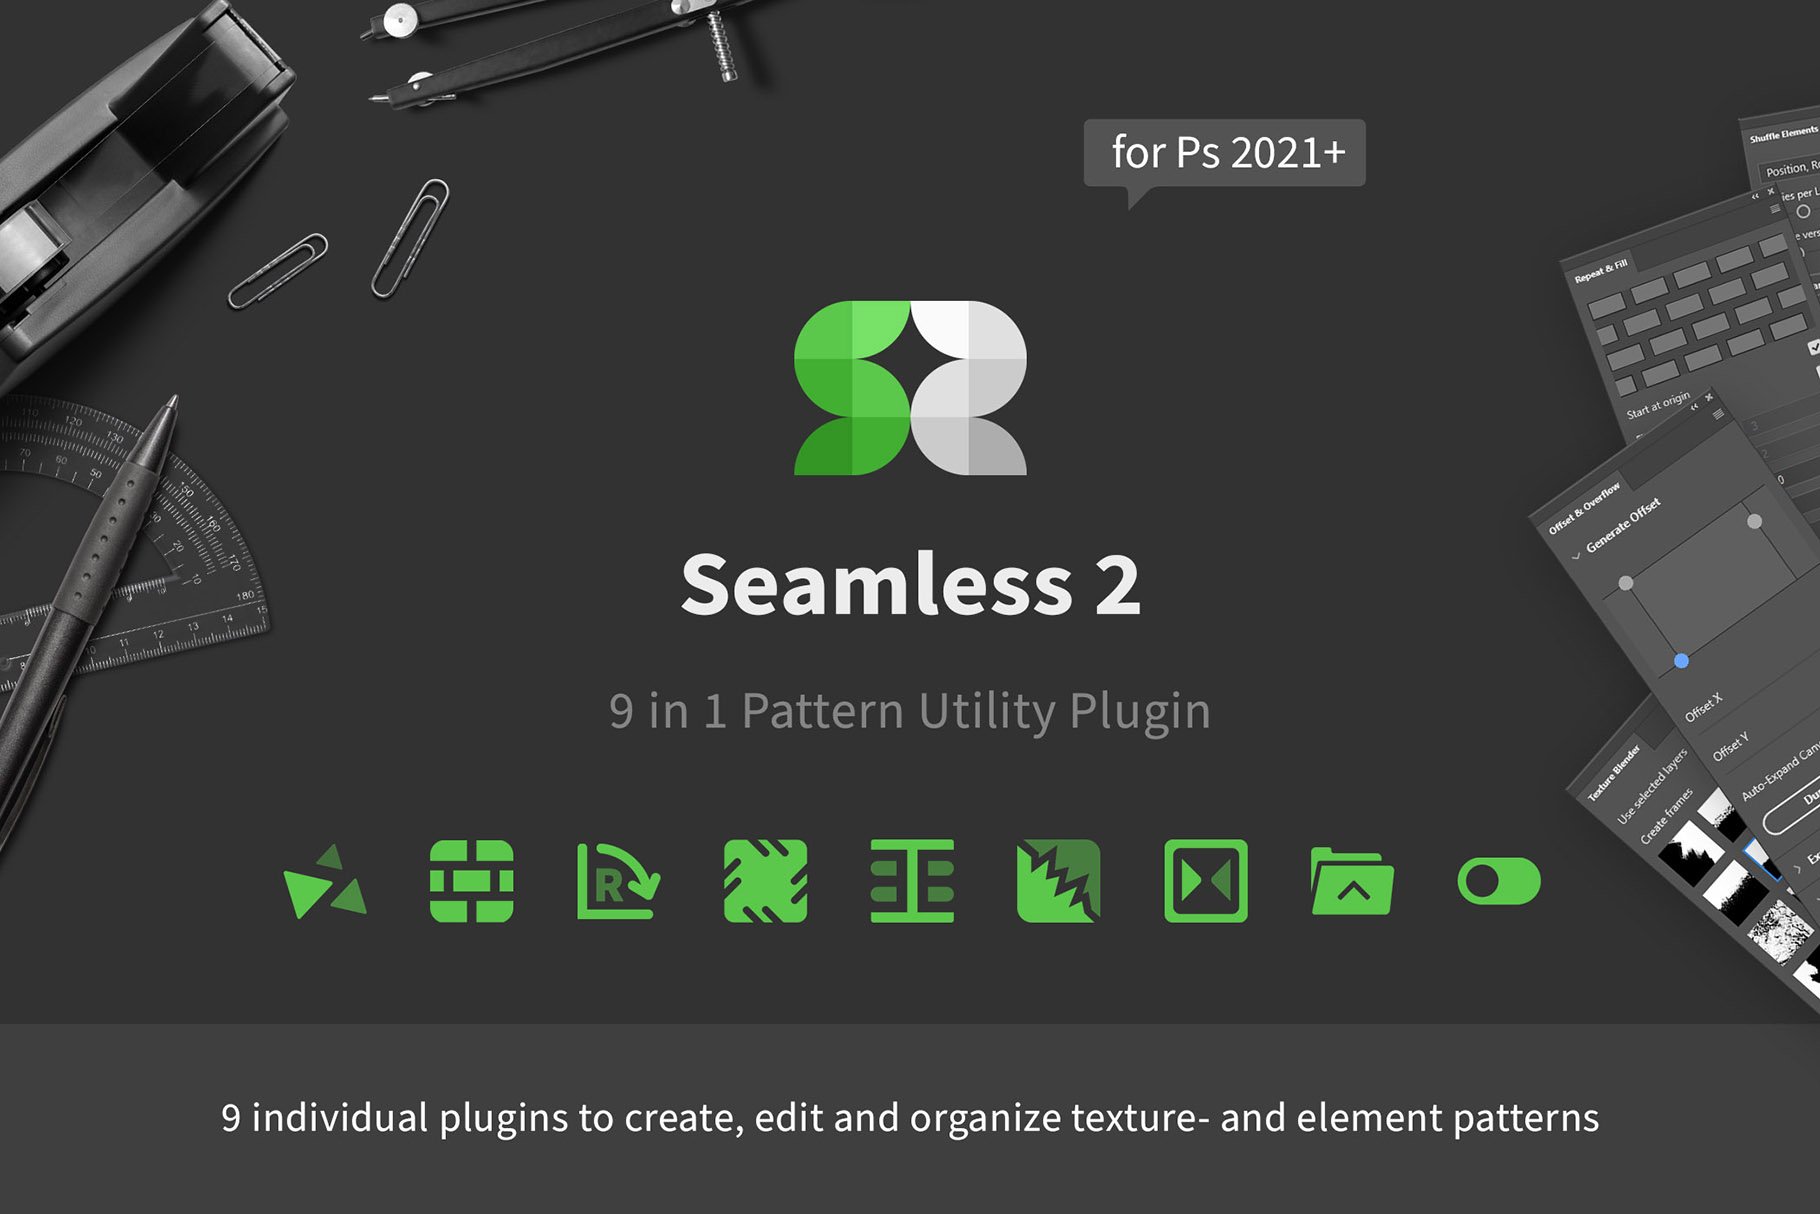 Seamless 2 - Pattern Utility Plugincover image.